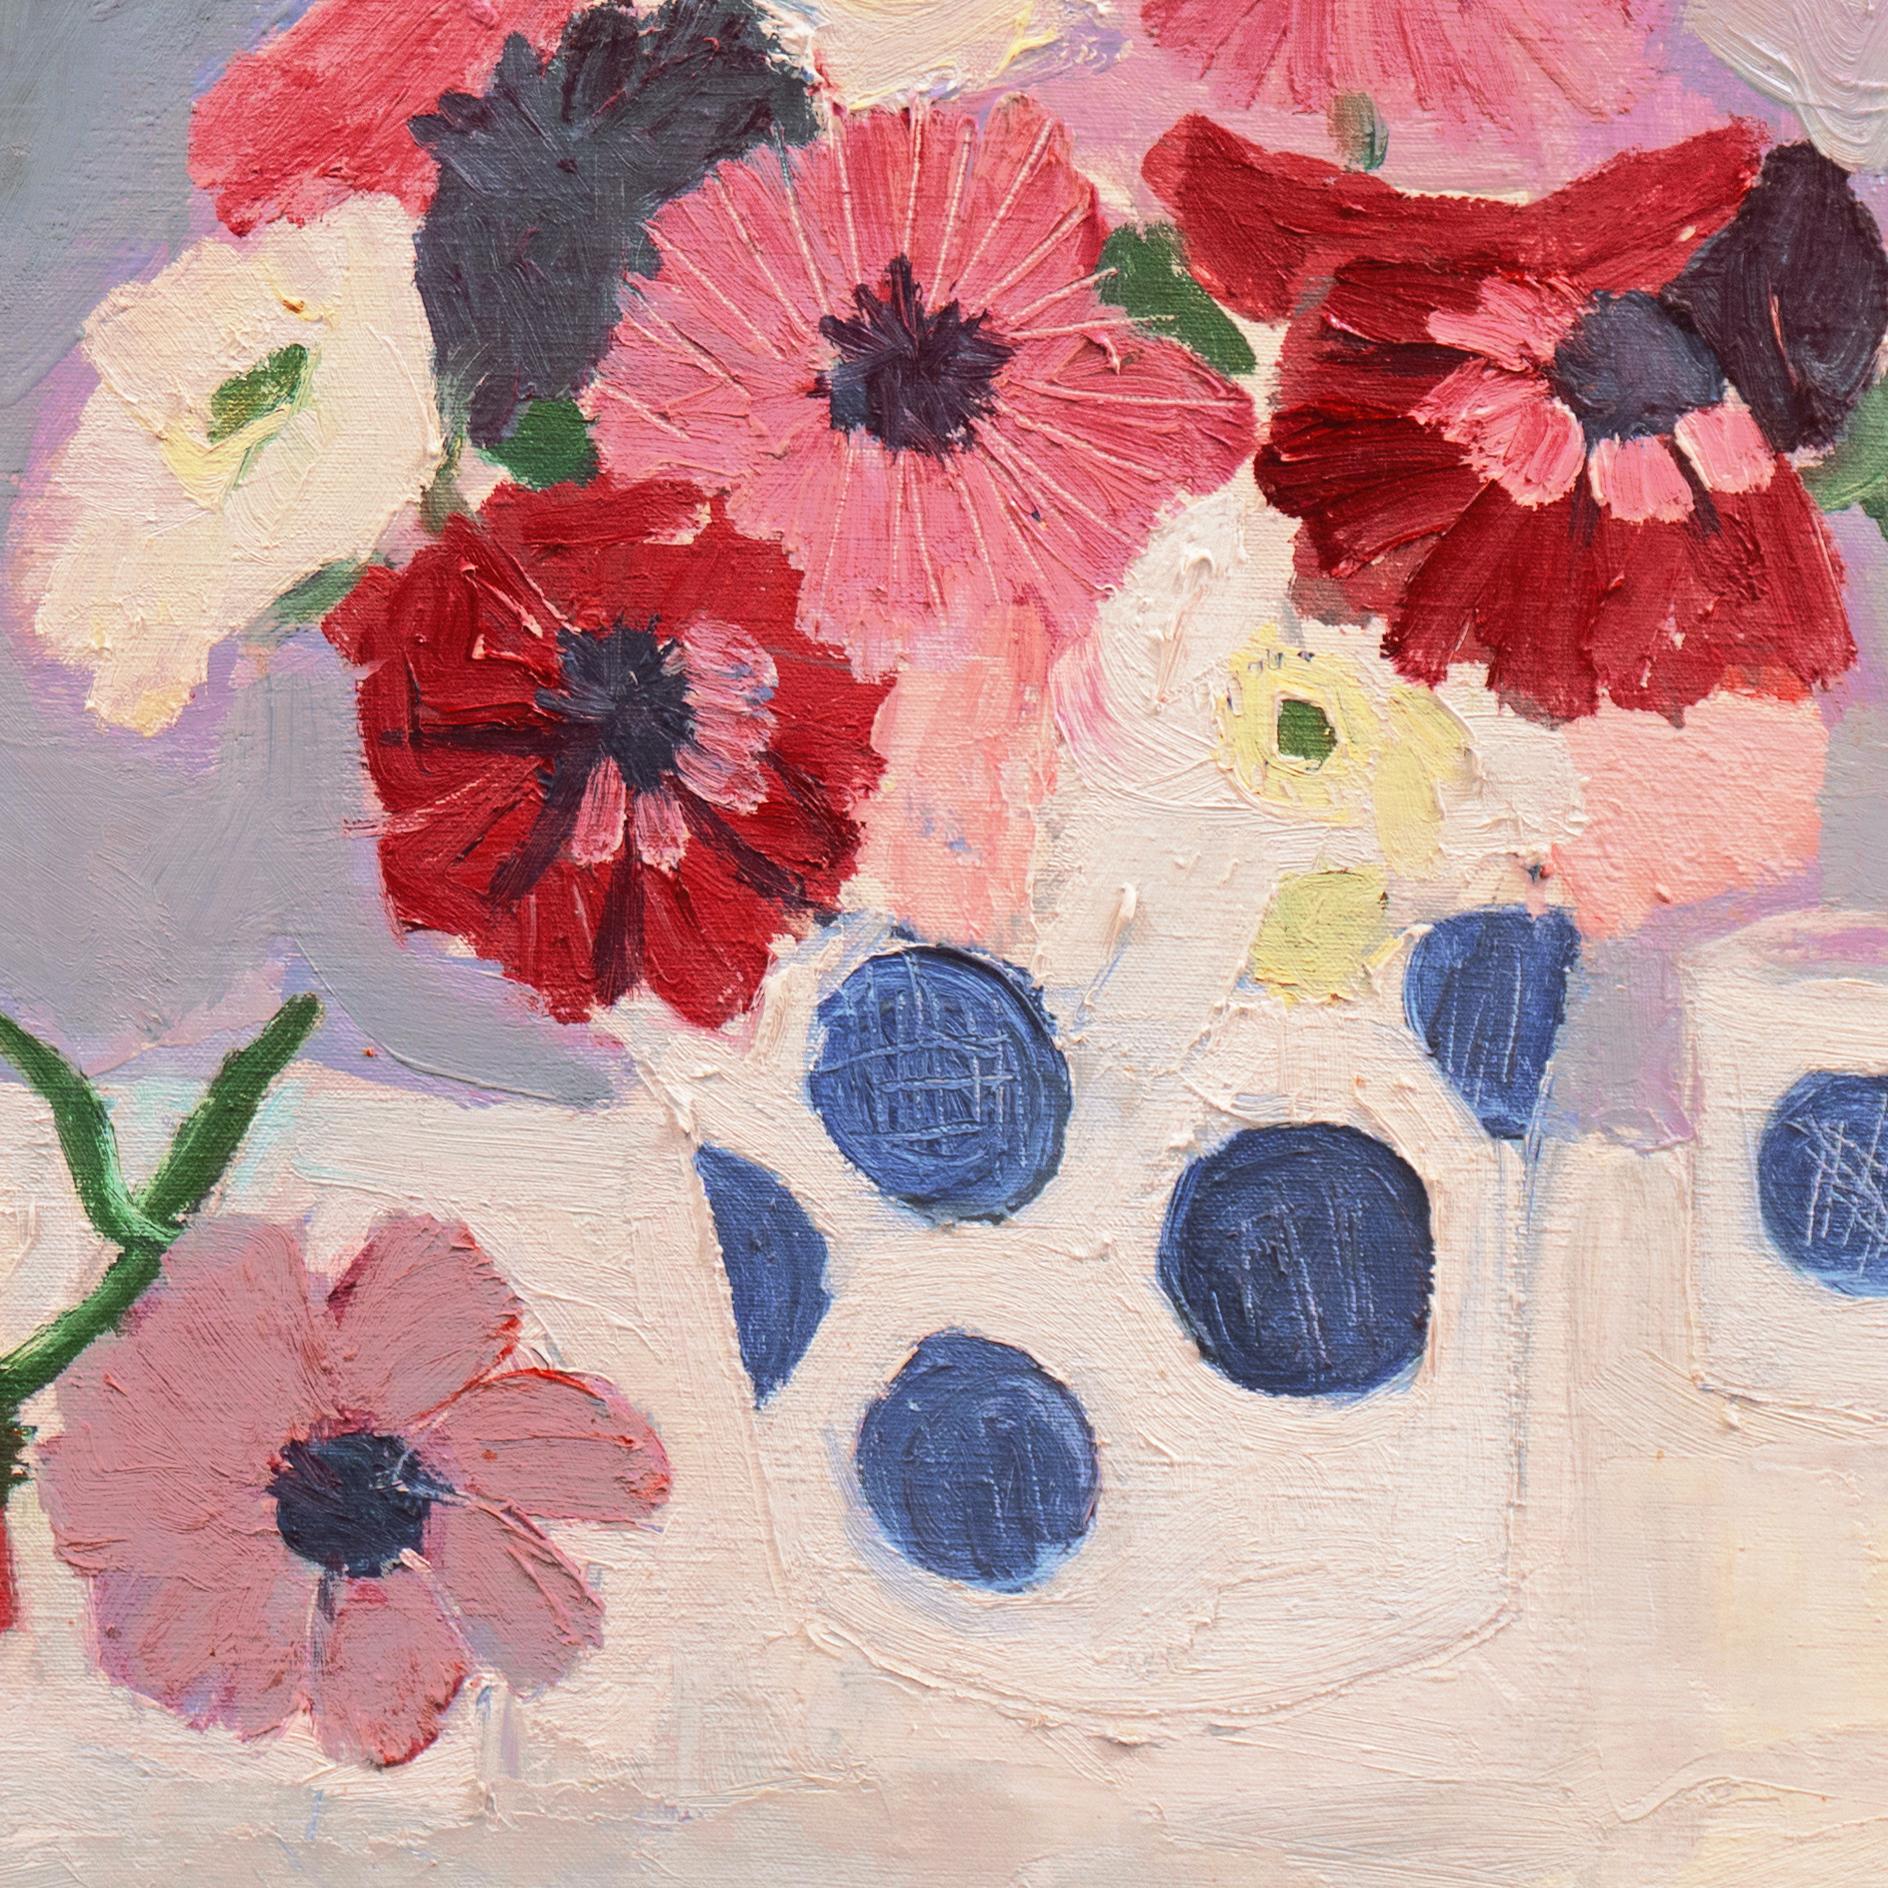 'Still Life with Blue Chair and Daisies', San Francisco Bay Area, Woman Artist - Modern Painting by Joan Ridgway Raguenvan (American, 20th century)